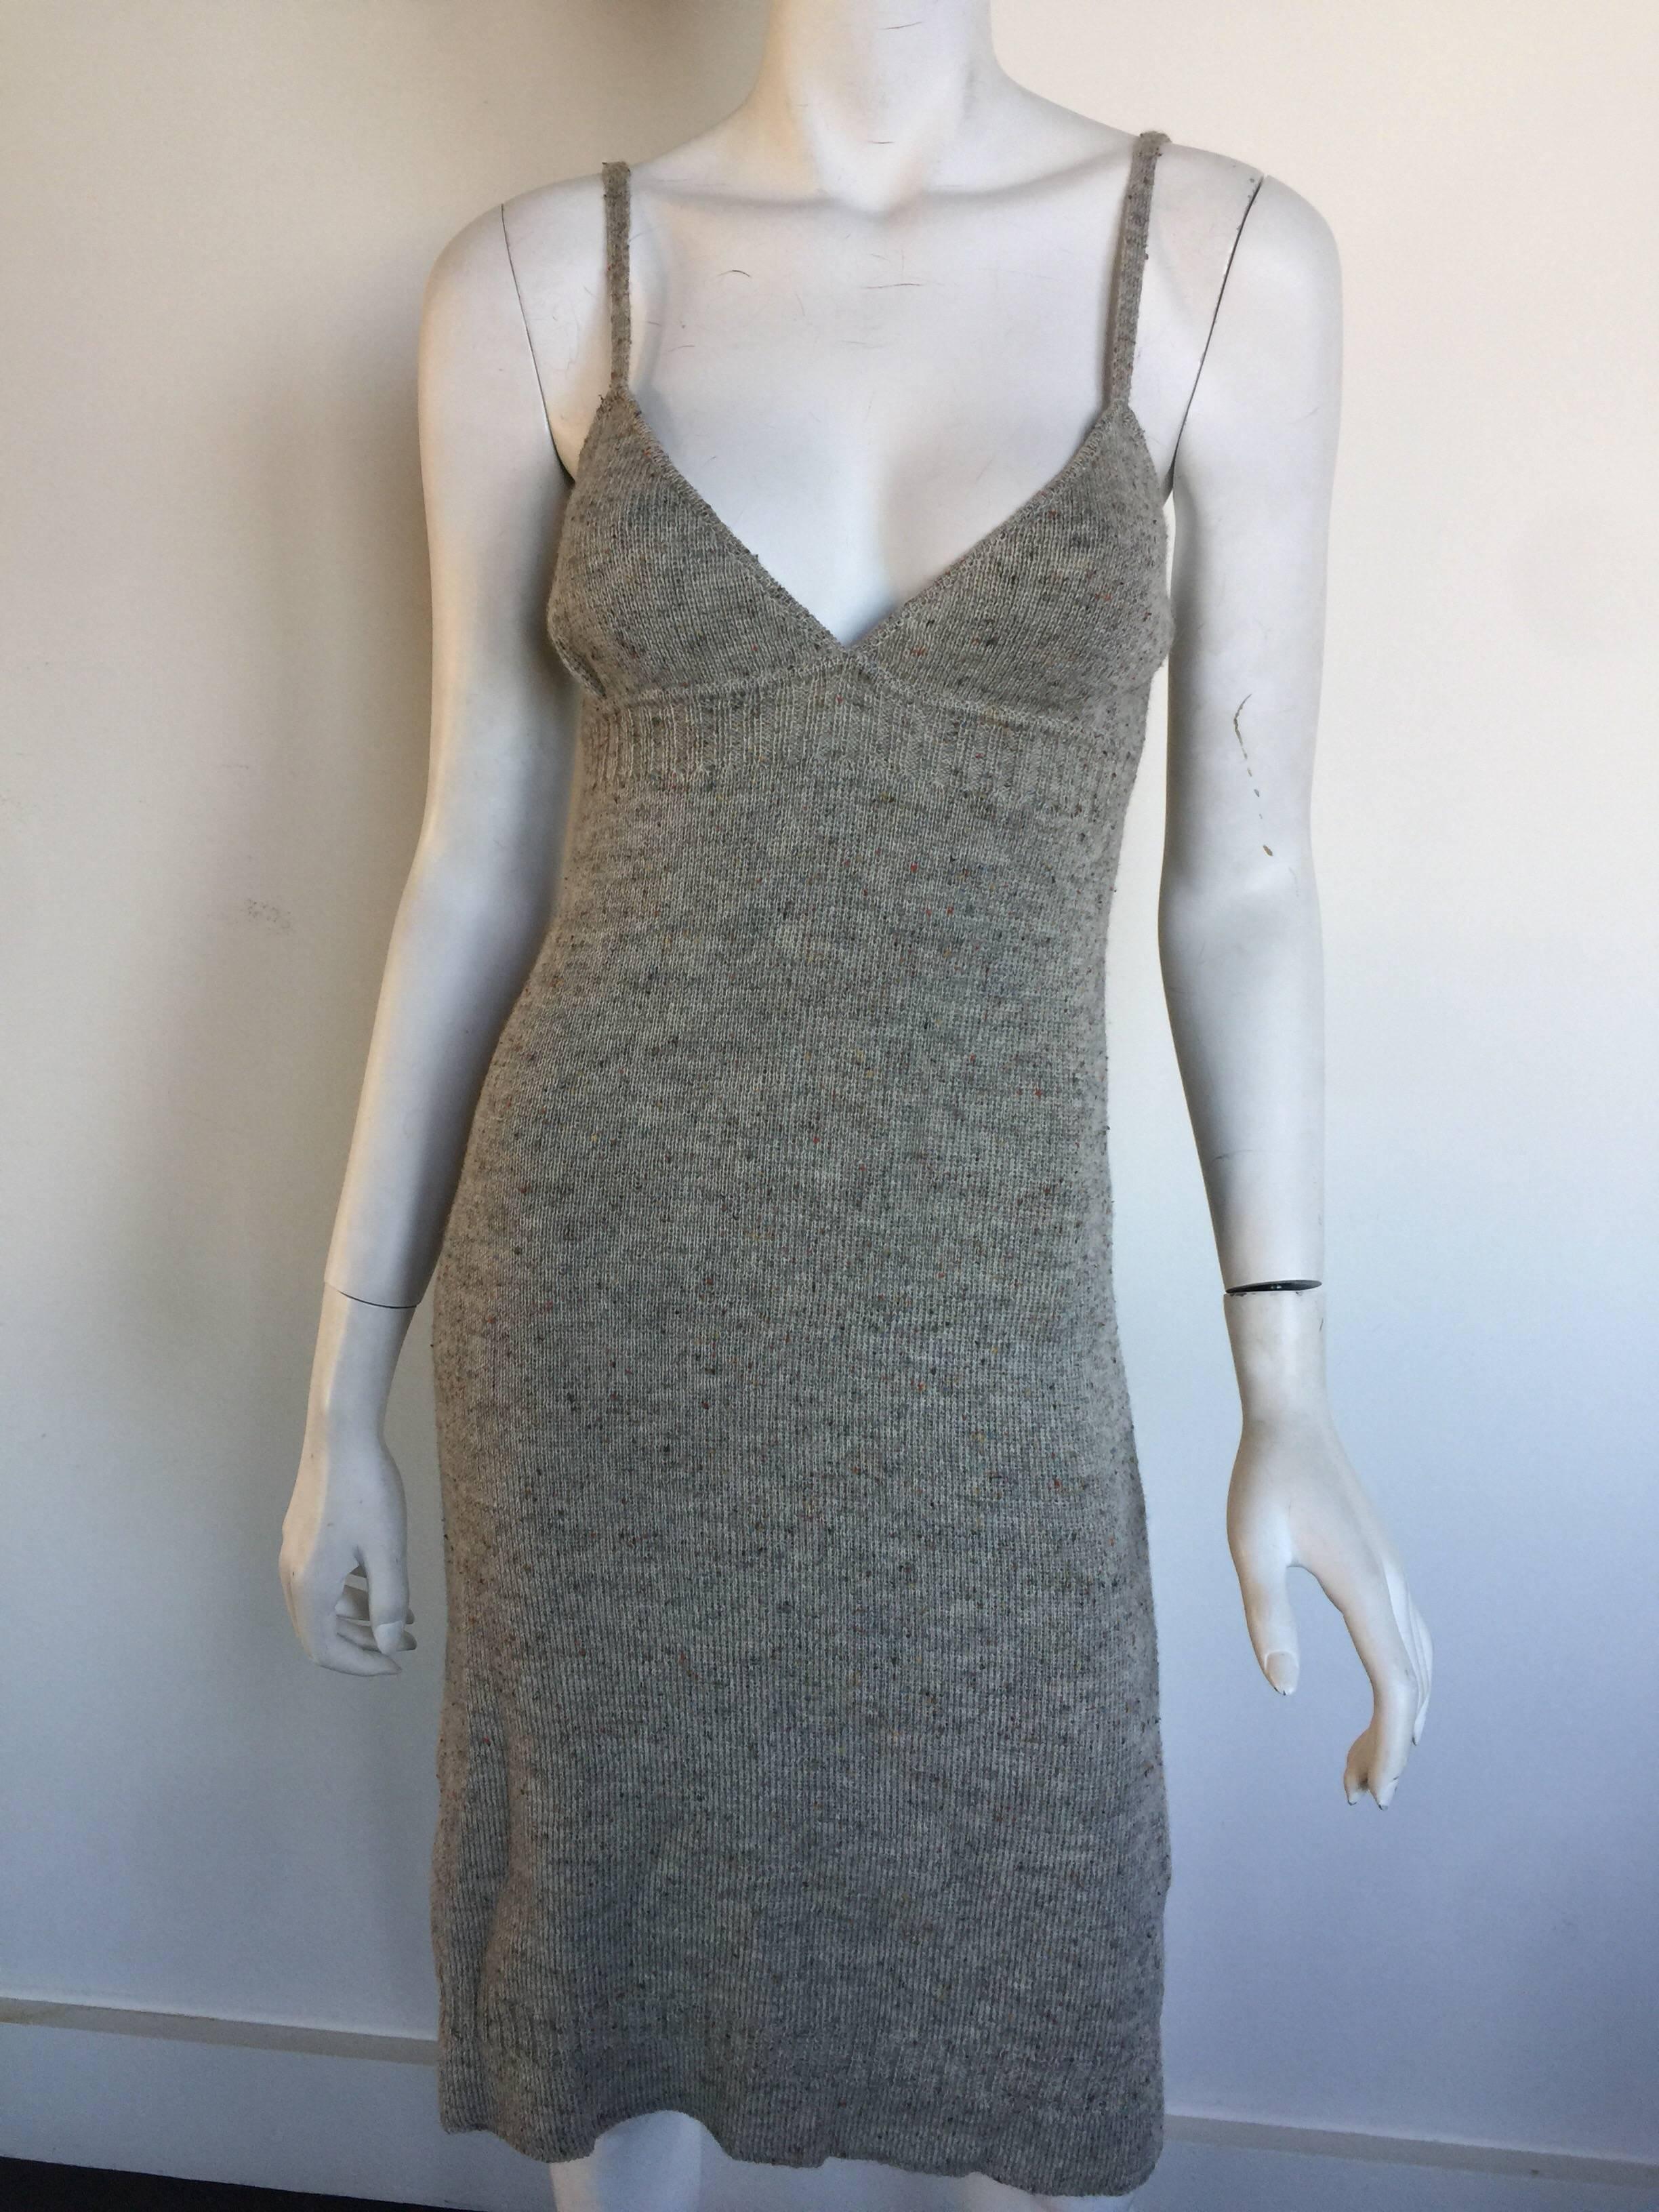 This grey knit Miu Miu dress is from the early 2000s.  It is in great condition and is missing size label but fits a 0-4.  The knit has a little bit of stretch.